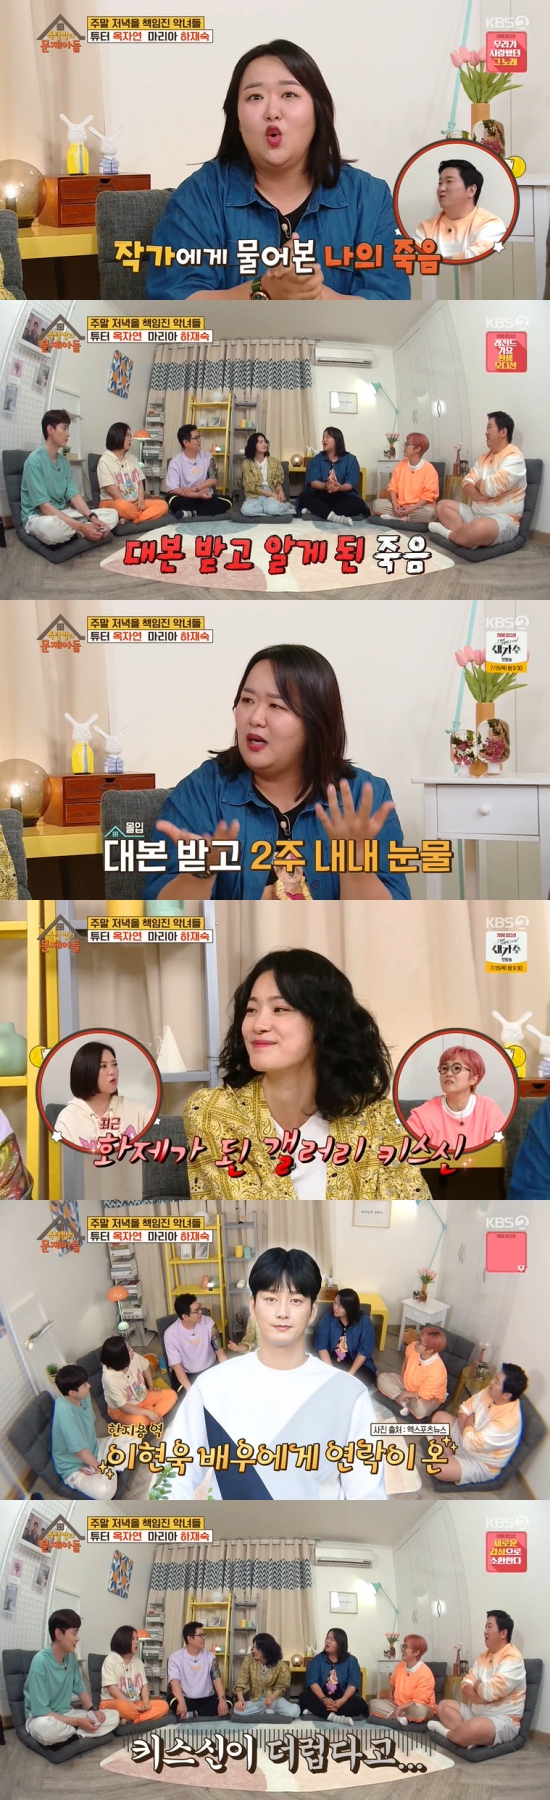 On KBS 2TV Problem Child in House broadcasted on the 3rd, Ok Ja-yeon and Ha Jae-sook appeared as guests, and scenes referring to the drama Mine and OK Photon were broadcast.On this day, Song Eun asked about the new Mary character in OK Photon Every week I look like a photon with my mother. What happened to Mary?Ha Jae-sook said: Mary died, suddenly dead in the happiest moments, because he was a person who did something morally wrong, so I thought he wouldnt end up with a happy ending.Ive been dying in the middle. I asked the writer a few times. He kept saying, Well? I knew it.Ha Jae-sook said, I was also an actor, so I was so sad and saddened because I died in the happiest moment.I cried a lot for two weeks. I finished well and came out happily, and many people asked me if I was worried and I was okay.In particular, Ha Jae-sook said: Ive been through it for the first time; Ive always had a lot of likeable roles, but some Grandmas Boy spit in a hallway apartment.I just said, Grandmas Boy Im not that person. Kim Sook also asked Ok Ja-yeon and Lee Hyeonwuks Kiss god, who had a lot of topics in Mine, Did not the people swear at the god?Ok Ja-yeon said: I dont know how its going to come out (on the air), Ive taken Kiss god hard because it should look worse with an affair; I havent spoken around either.Lee Hyeonwuk Actors acquaintance, who played Acting together, texted his brother. (Kiss god) is dirty. Furthermore, Ha Jae-sook said, At first, I was proud to say that I was good at Acting because I was so excited about the bulletin board.If you continue to listen to the curse, it sounds like a curse. Ok Ja-yeon said, Actor does not love his role too much. I have a reason to do it, but I am getting used to it.Kim Yong-man wondered, Did you slap Lee Bo-young? And Ok Ja-yeon said, I was wondering. (What it feels like to hit your cheek)? I never hit it. I was expecting it a little.As soon as Bo Young went, he said, I do not hit you. I do not hit you.I thought you said, You have to hit me, because the director valued real things. So I didnt get hit.(The broadcast) said, It would be okay if it really did not fit.Photo = KBS Broadcasting Screen